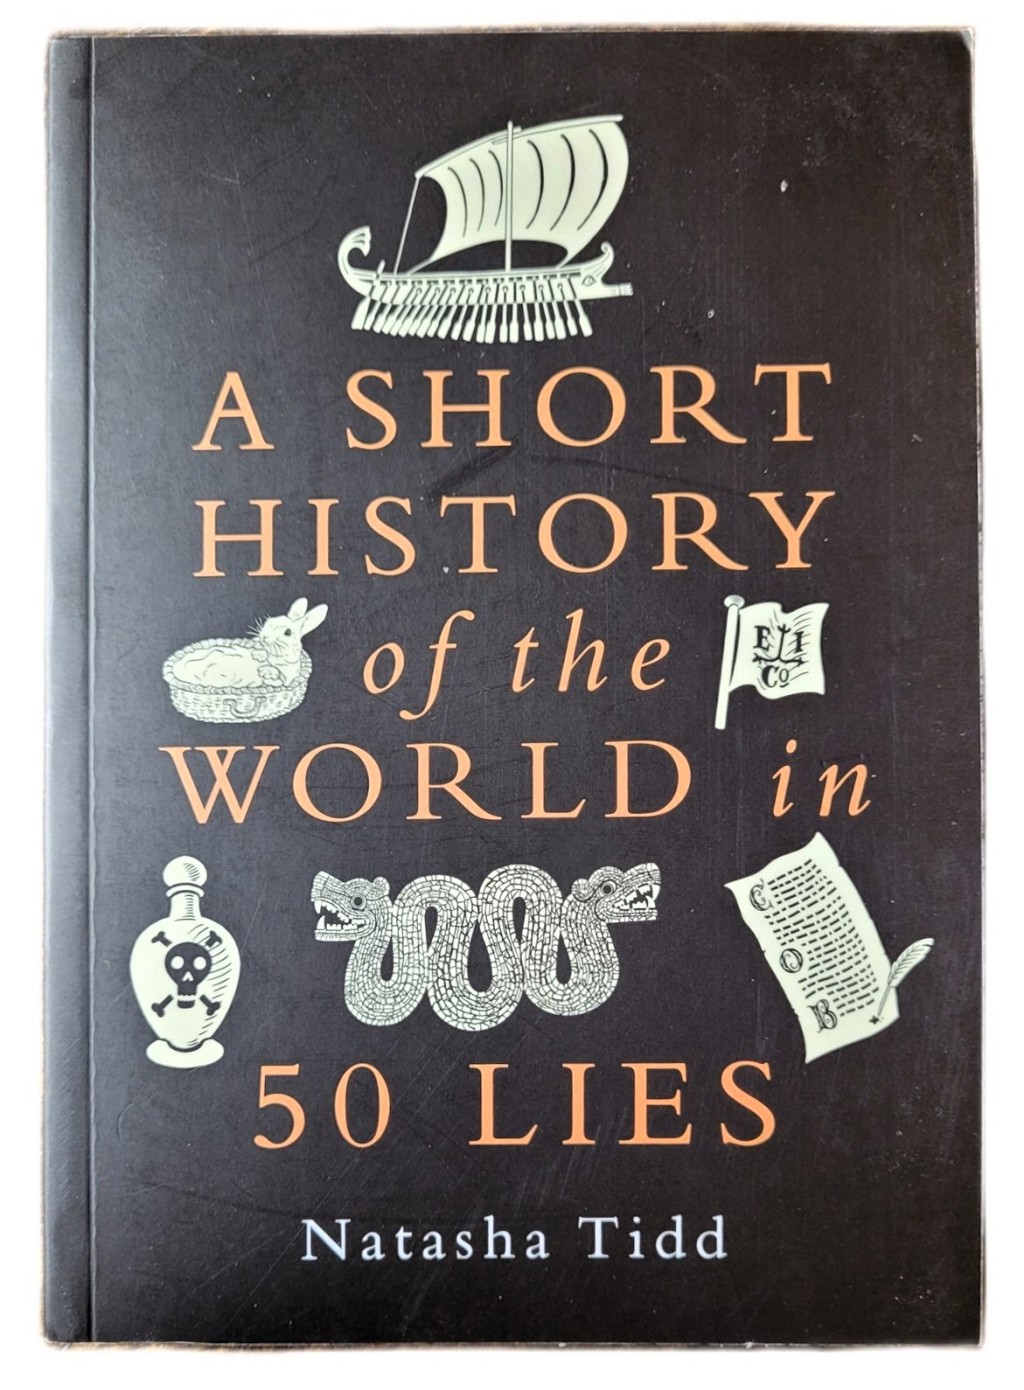 A Short History of the World in 50 Lies